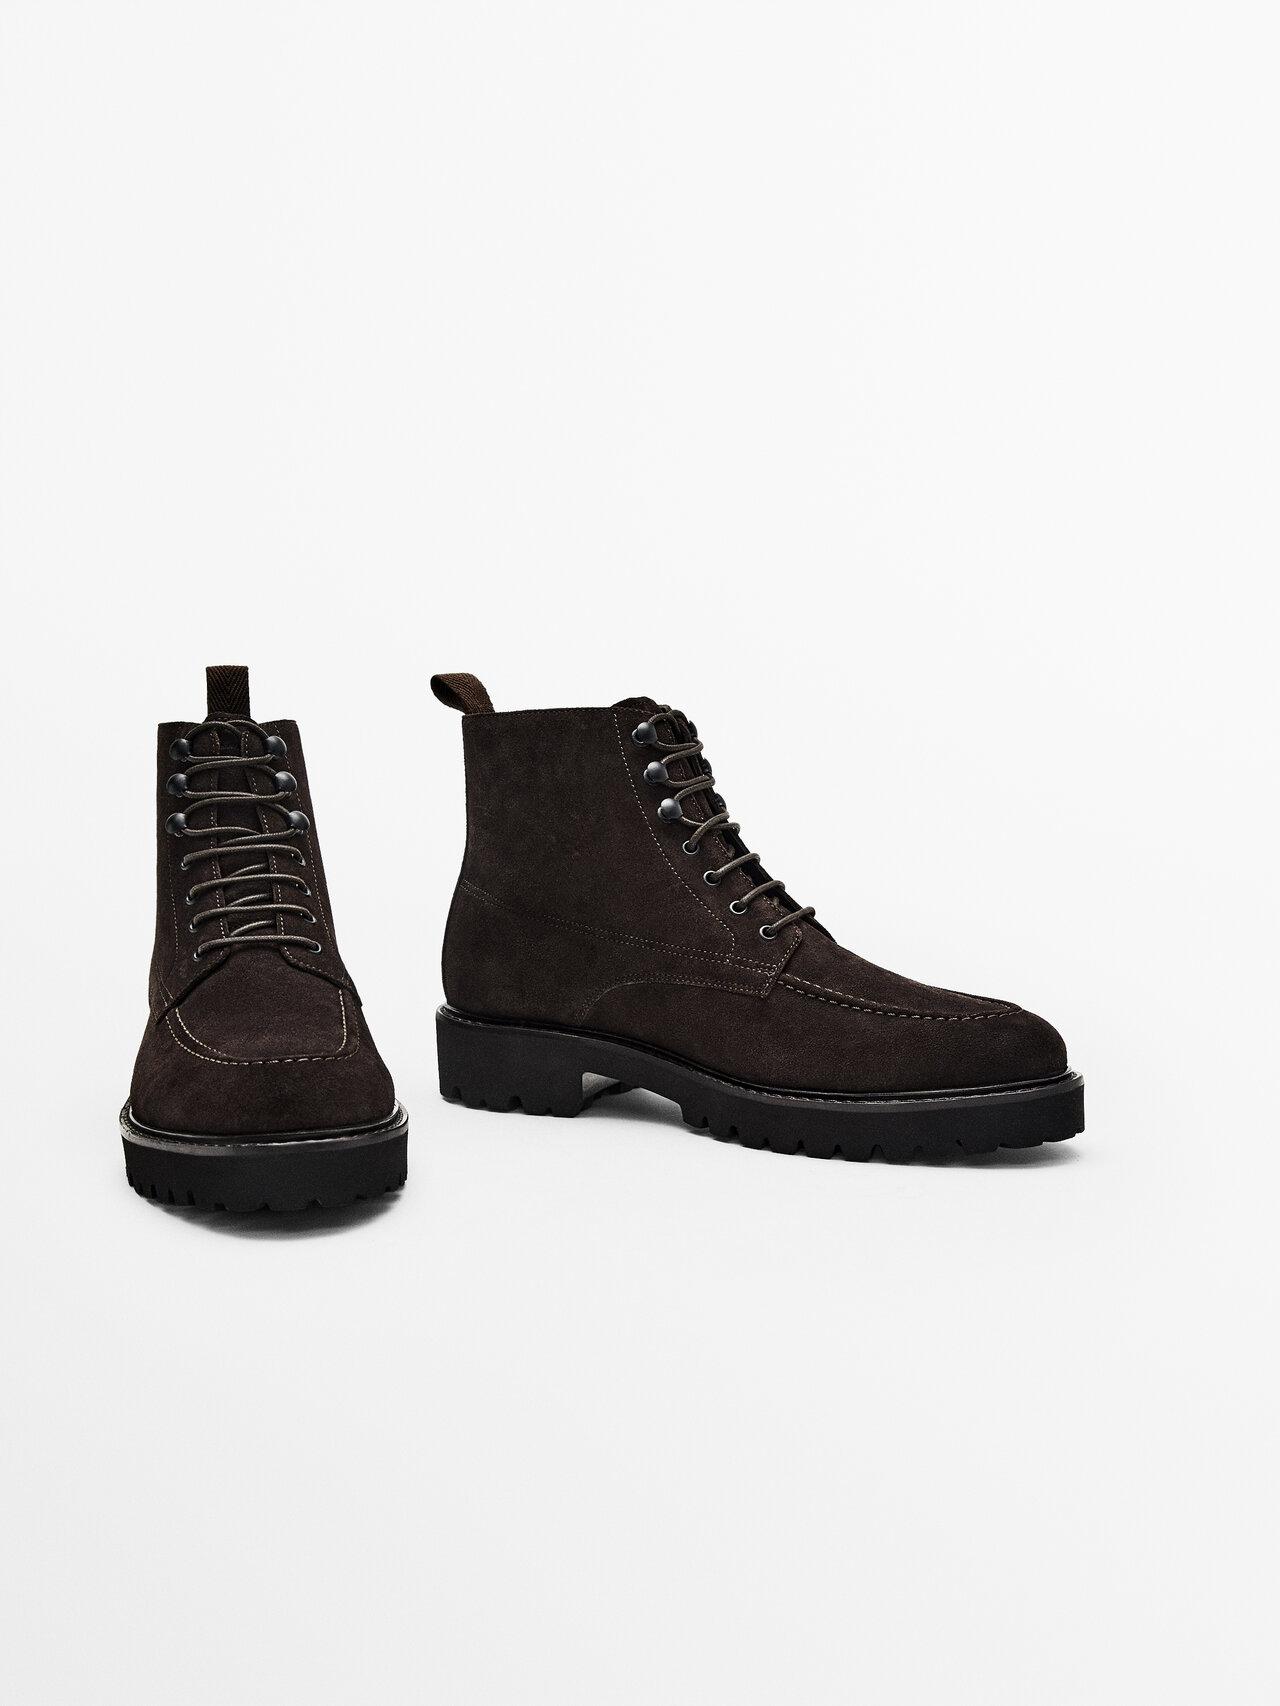 MASSIMO DUTTI Brown Split Suede Leather Moc Toe Boots for Men | Lyst